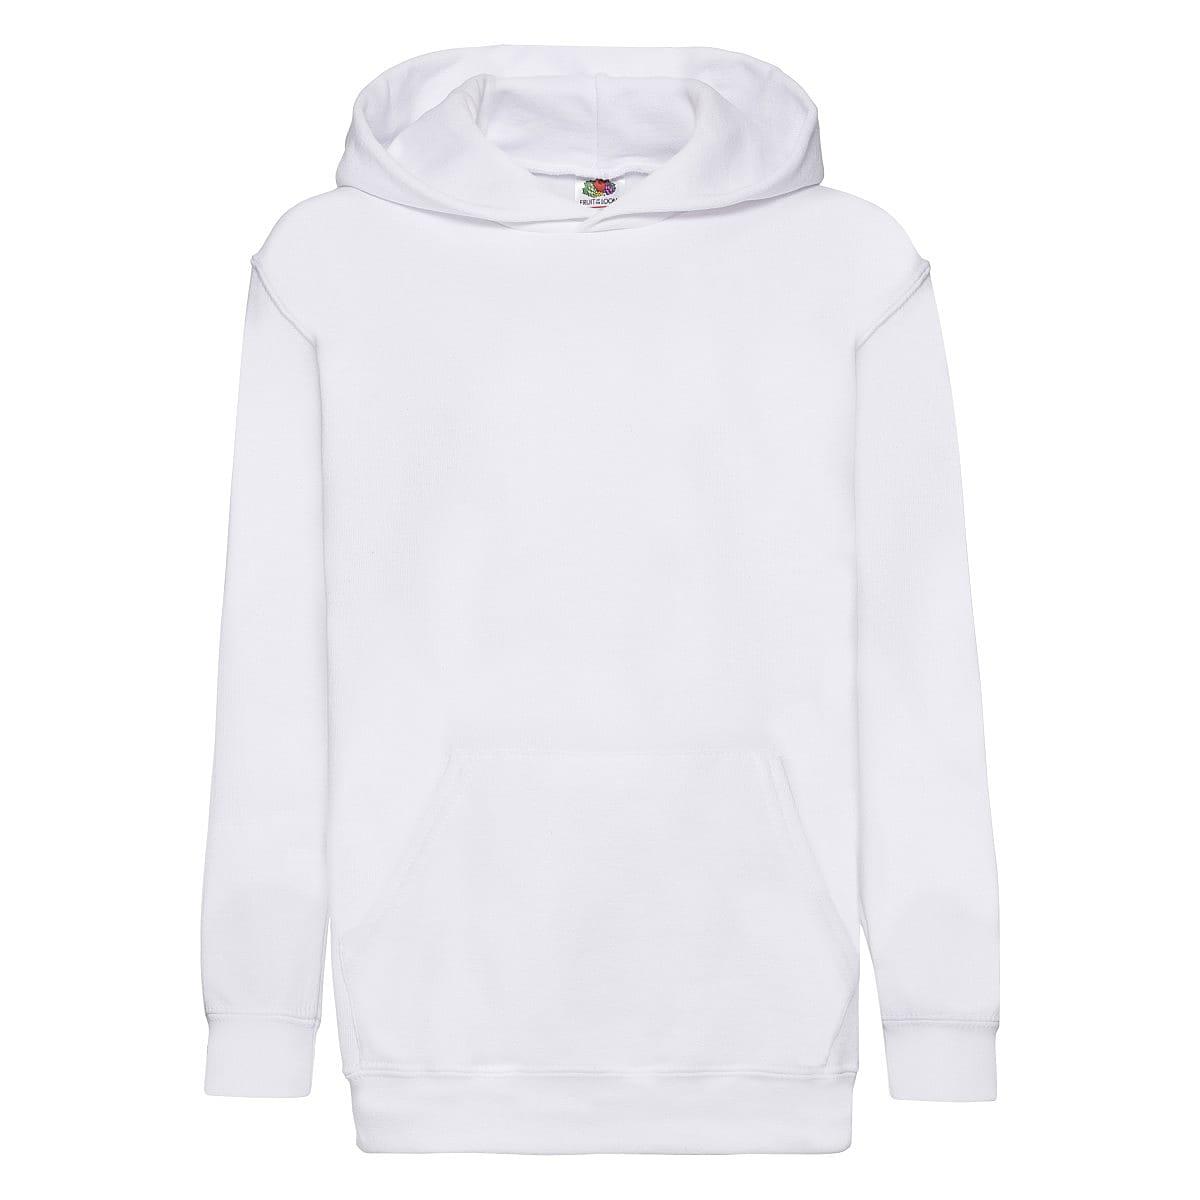 Fruit Of The Loom Childrens Hoodie in White (Product Code: 62043)